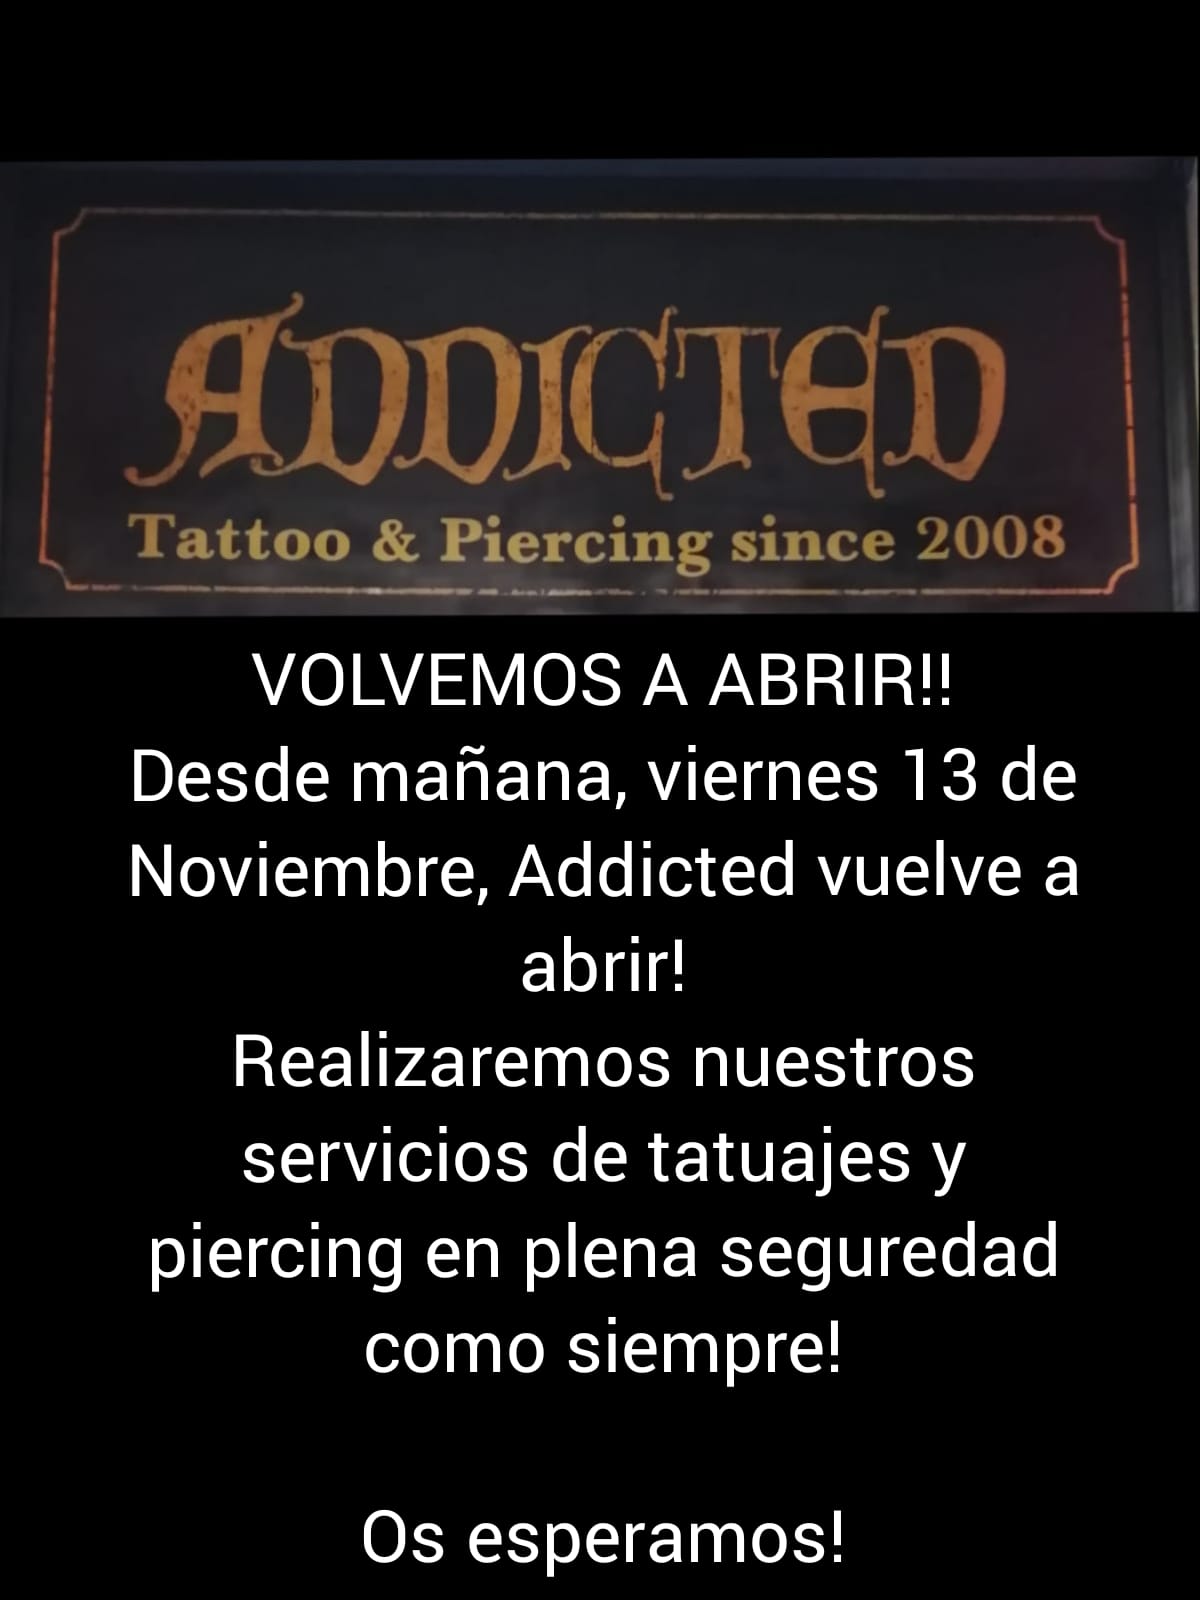 Addicted Tattoo reopens its doors!